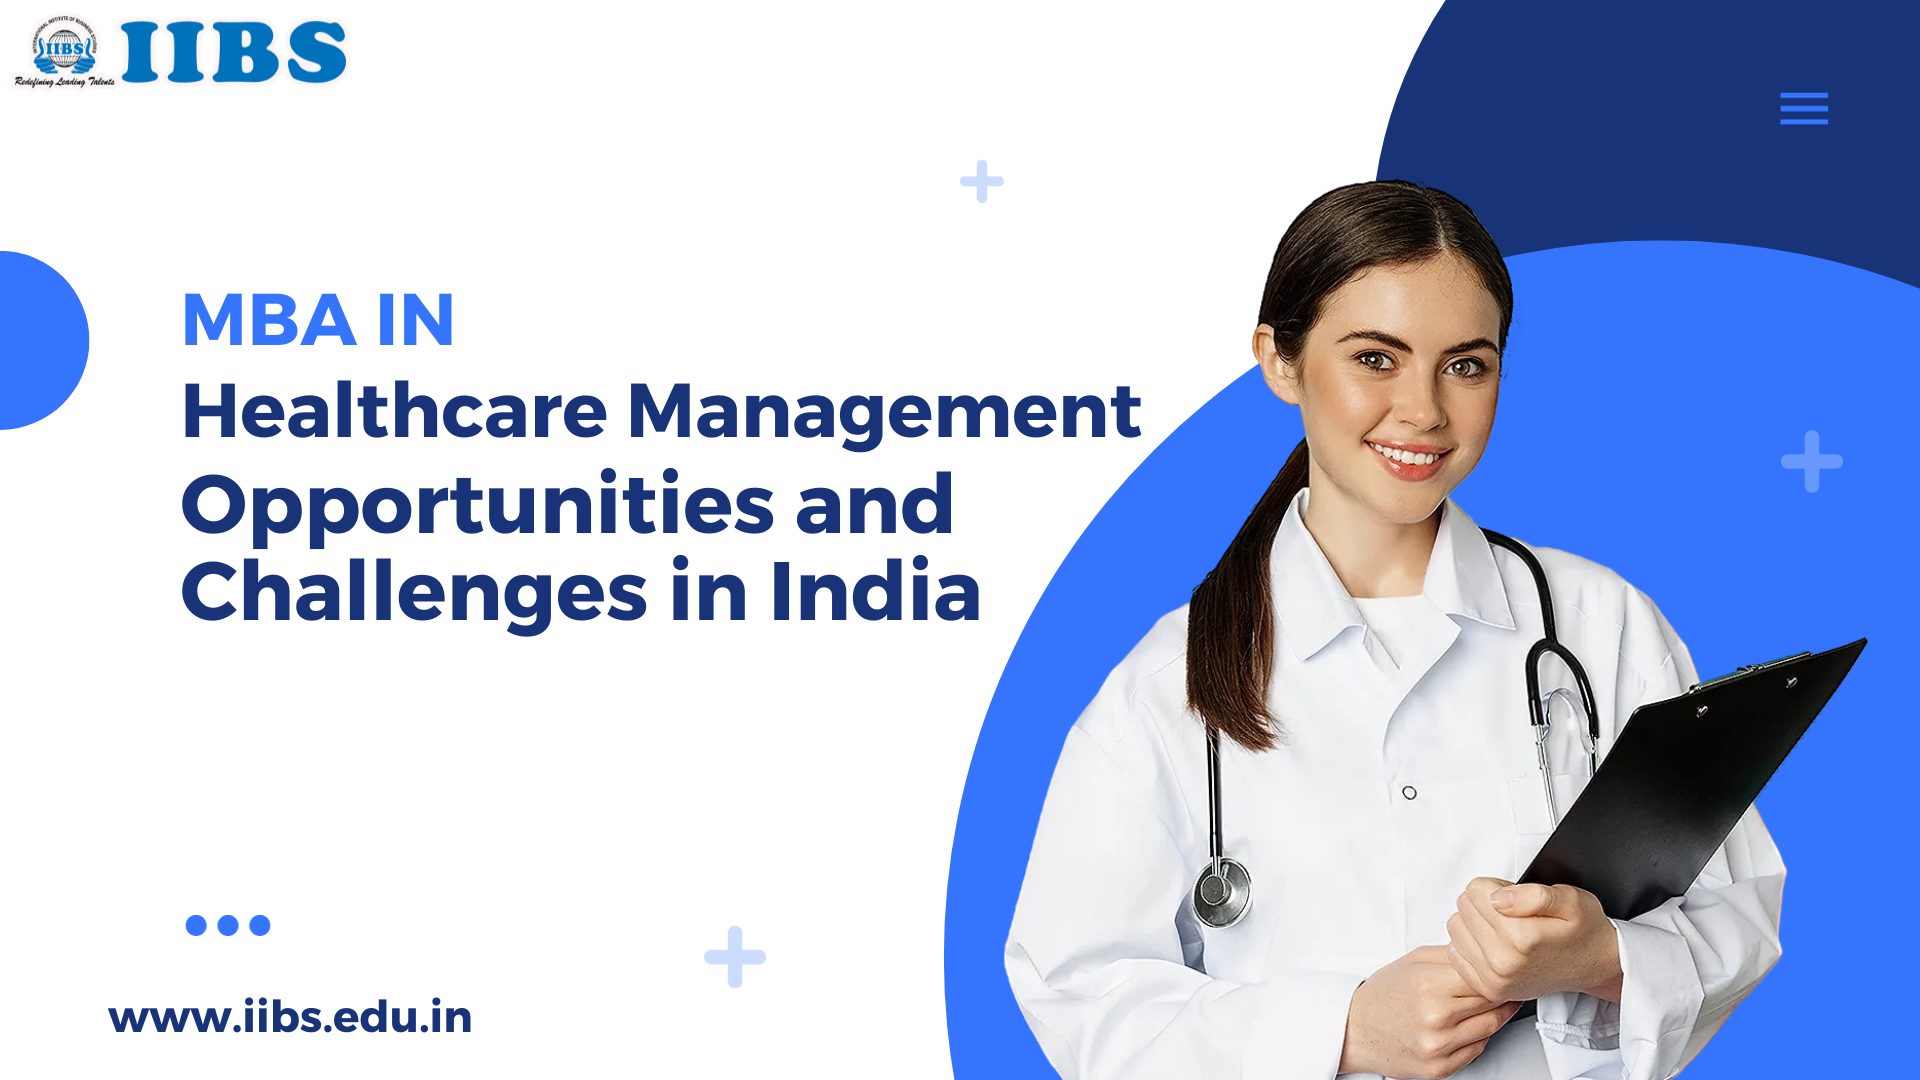 MBA in Healthcare Management: Opportunities and Challenges in India